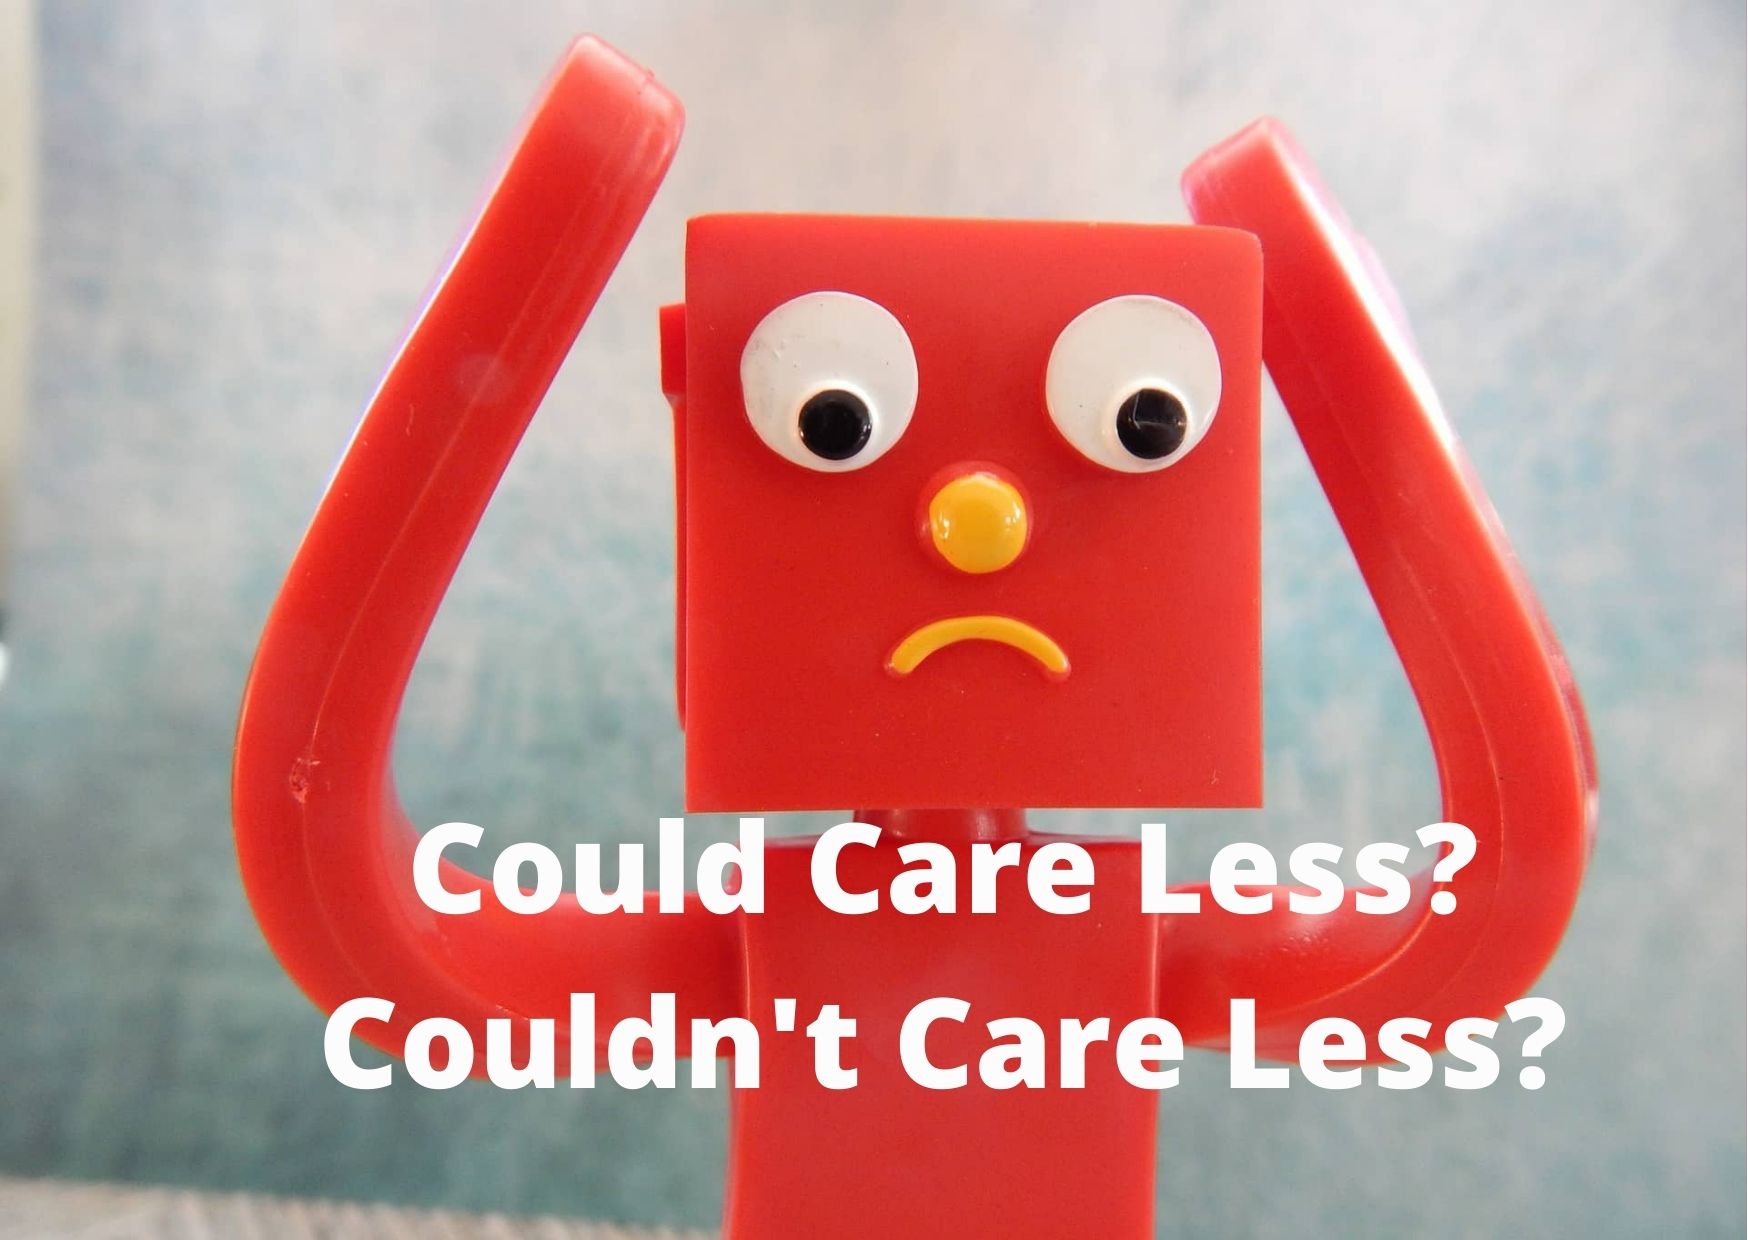 Graphic of a confused figurine with the words "Couldn't Care Less? Could Care Less?"